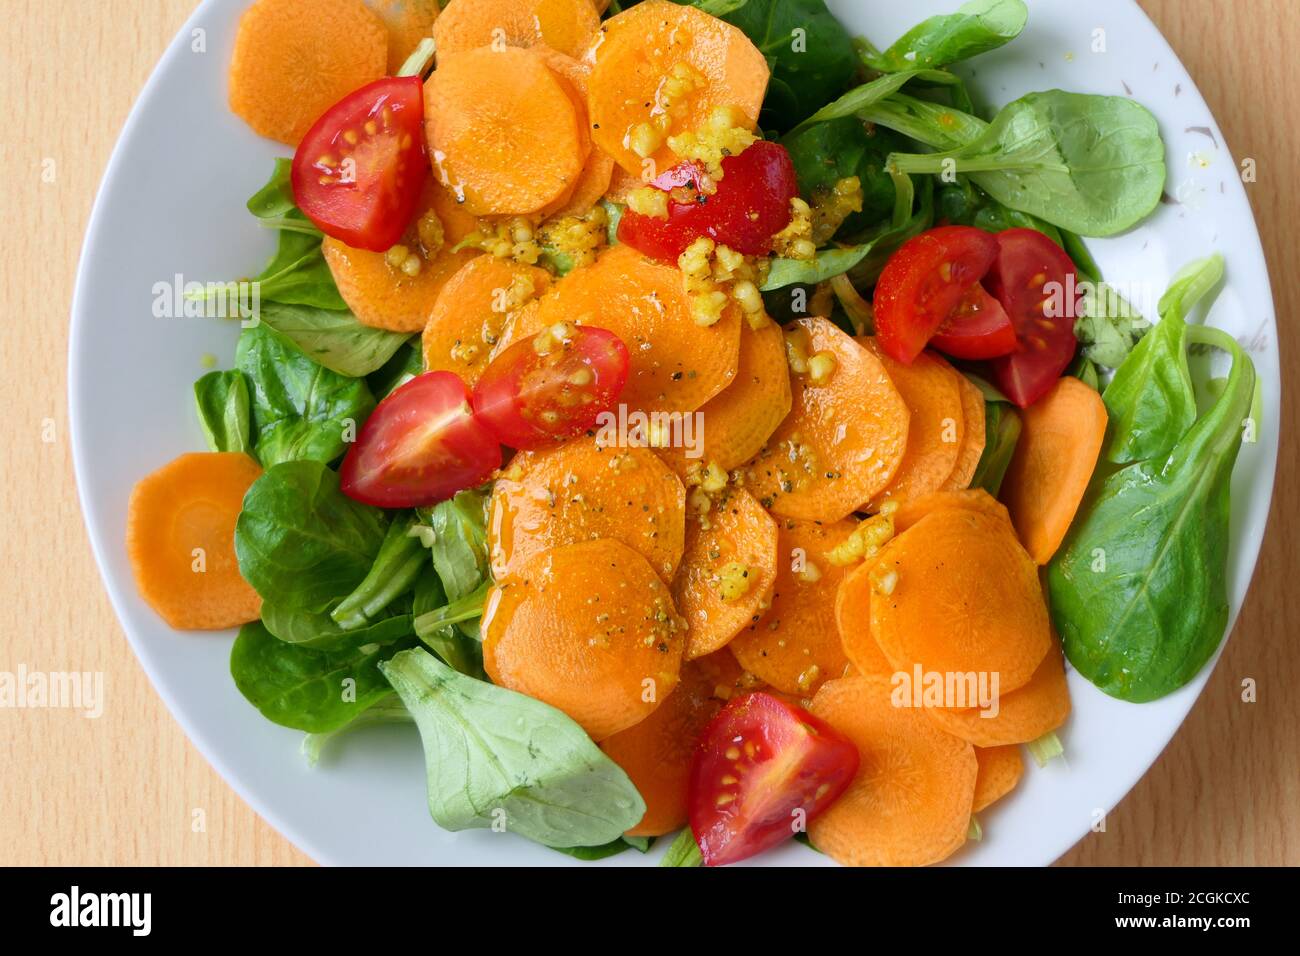 Aerial view of a healthy vegetarian homemade salad with nut lettuce or lamb's lettuce, carrot slices, tomatoes and garlic on a white plate Stock Photo